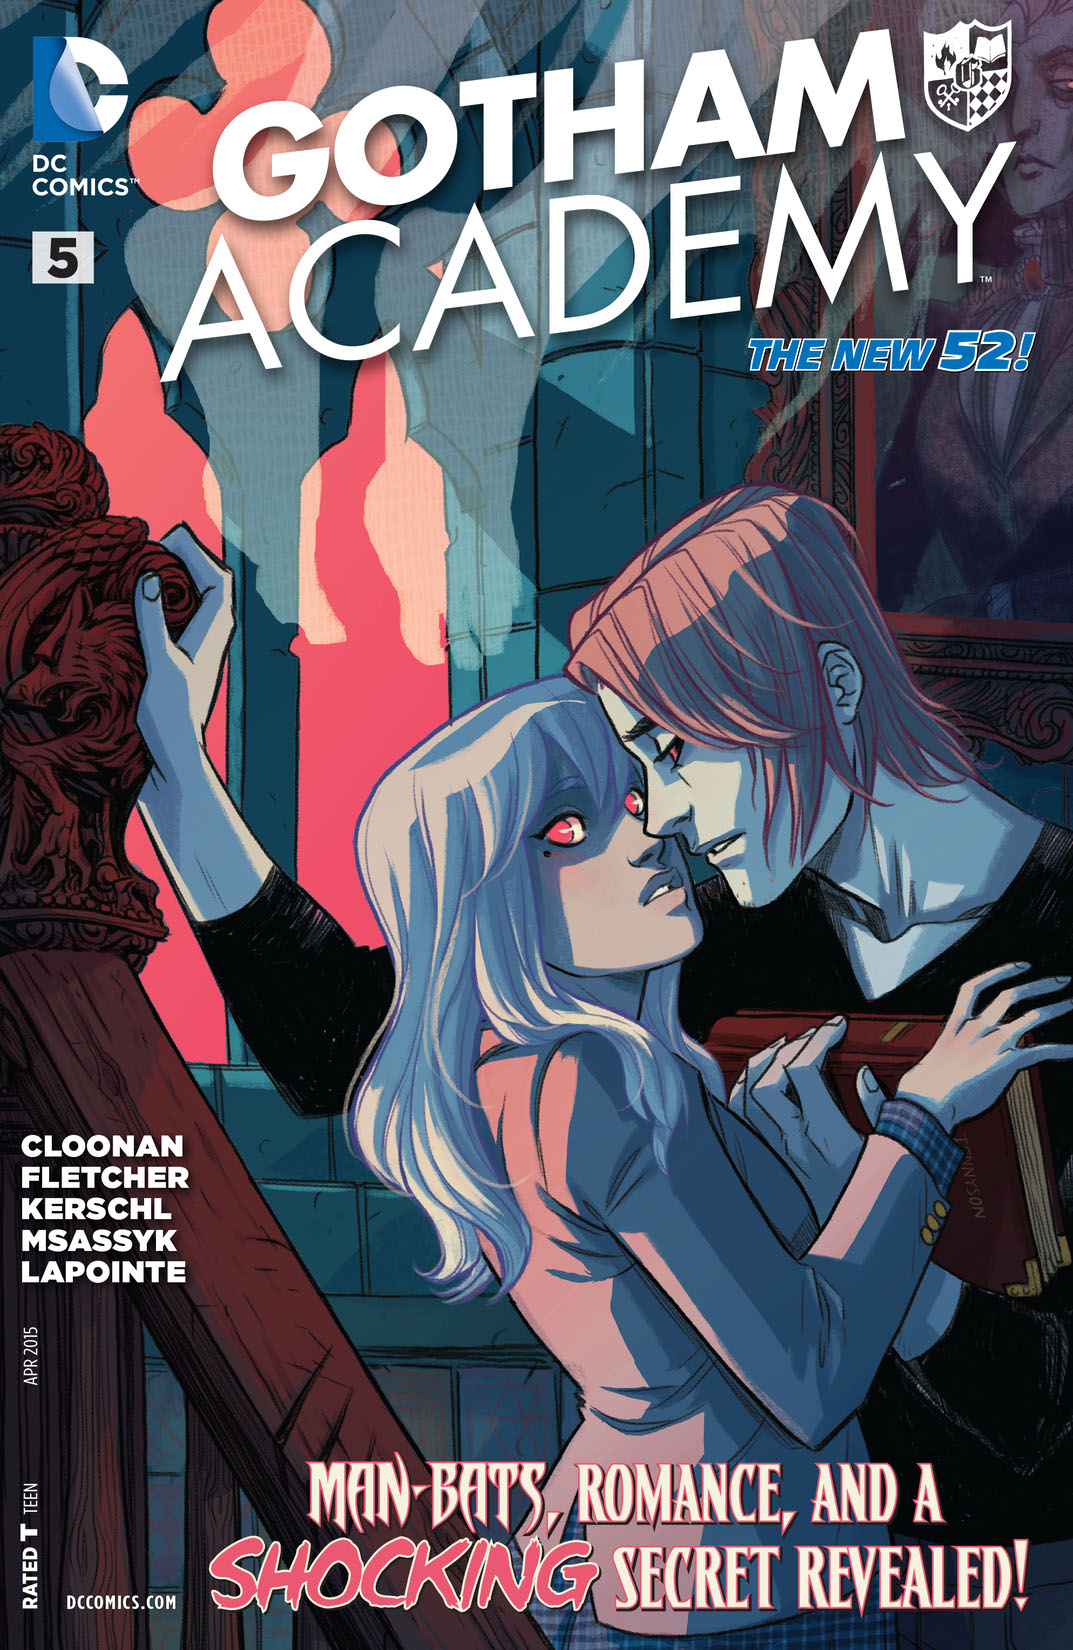 Gotham Academy #5 preview images